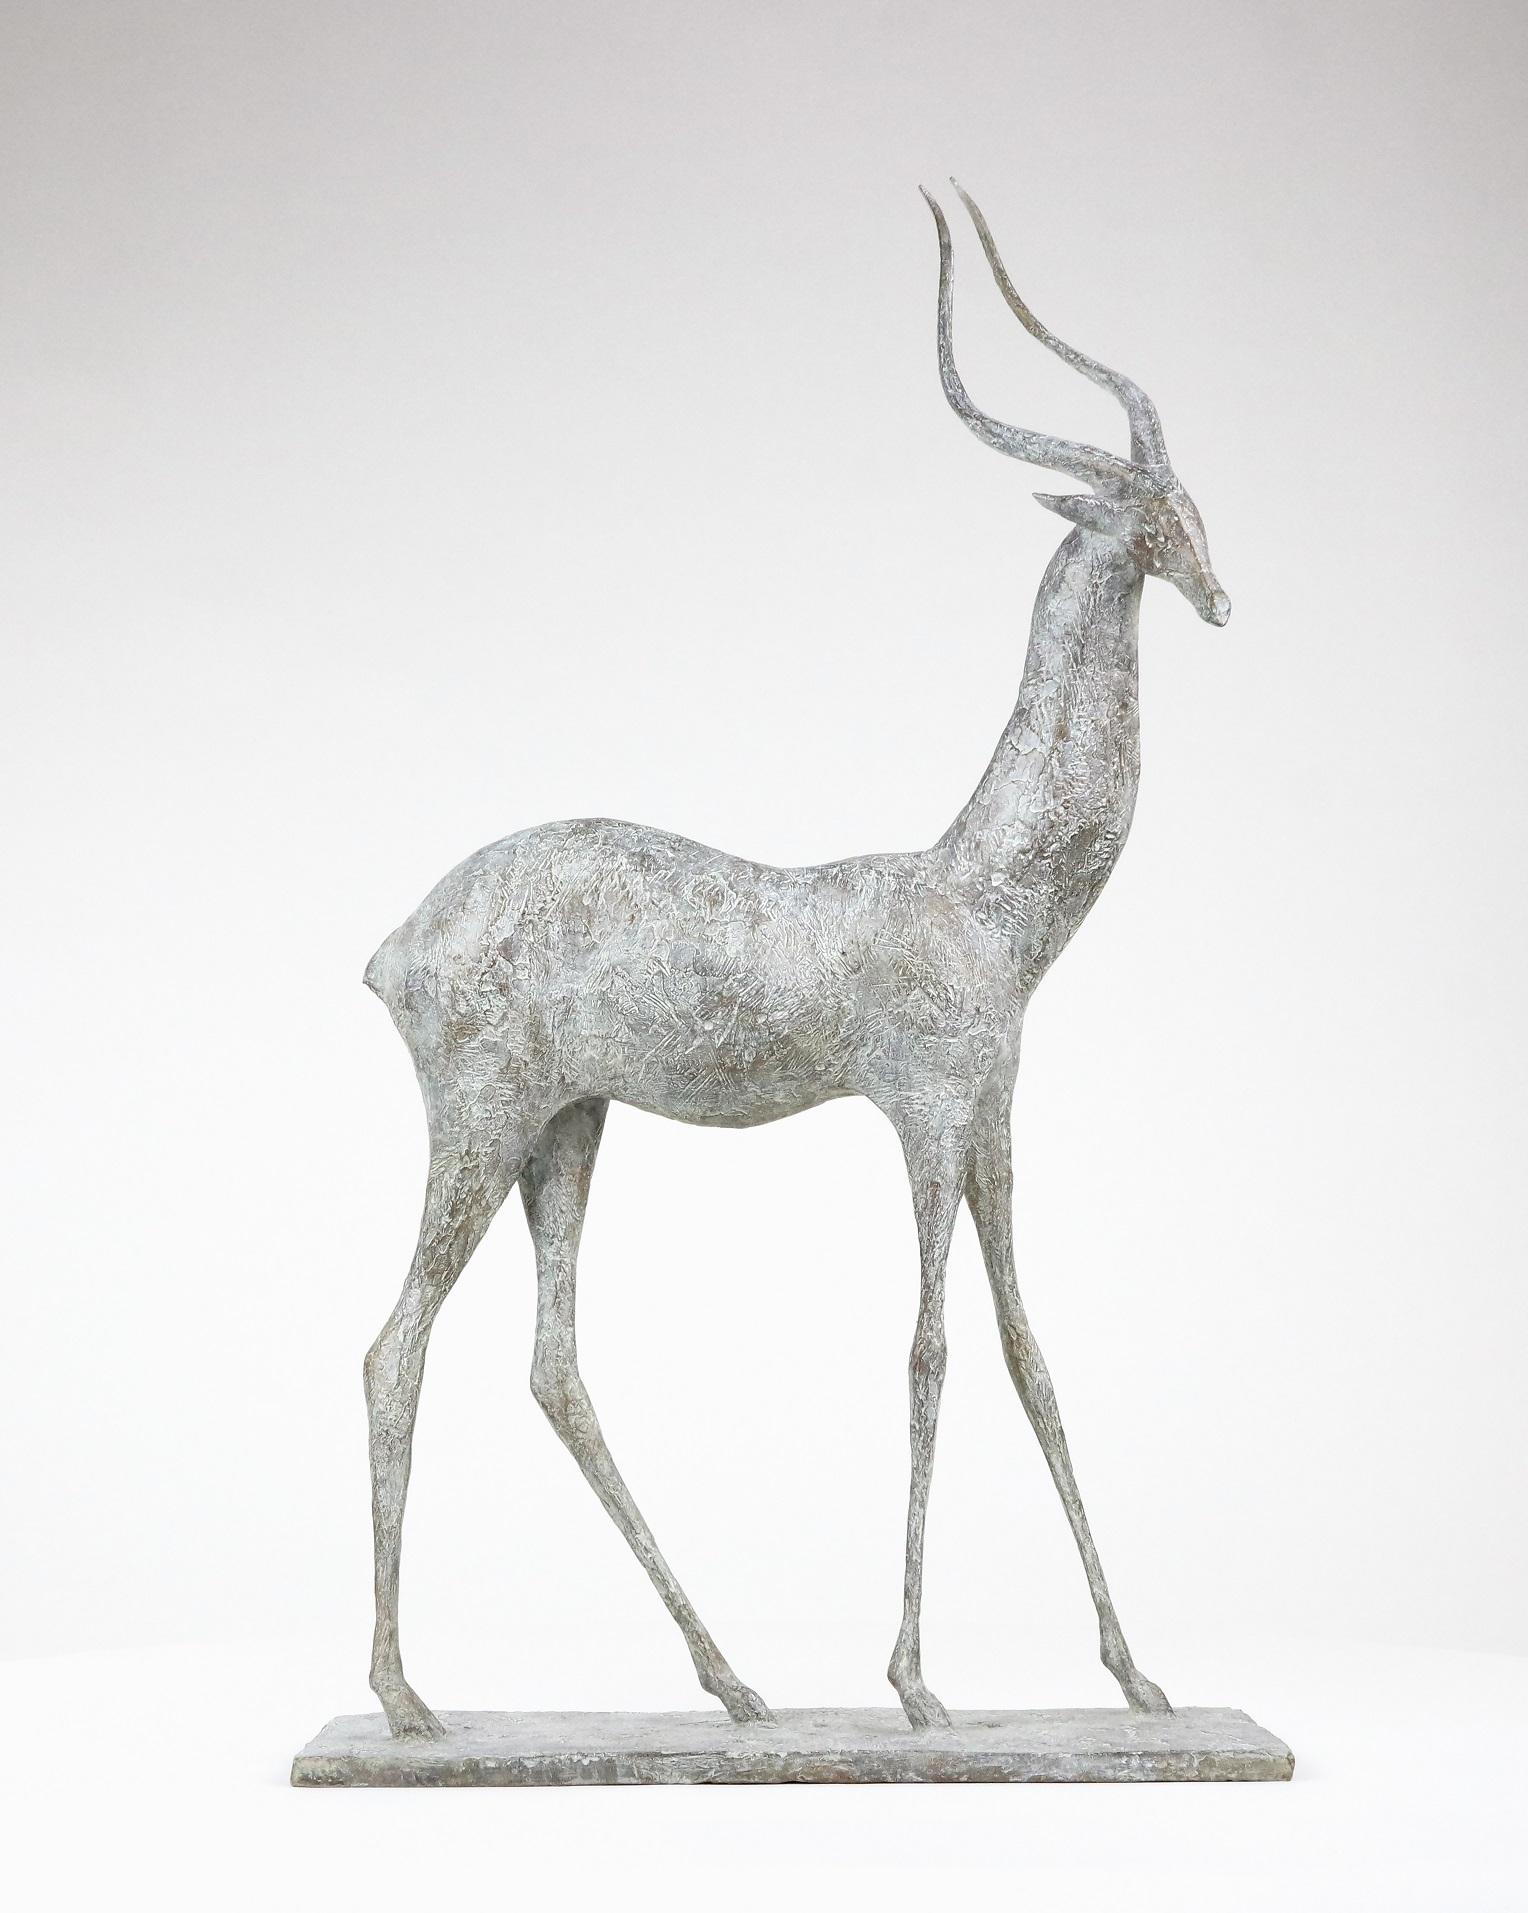 Gazelle I is a bronze sculpture by French contemporary artist Pierre Yermia, dimensions are  70 × 40 × 20 cm (27.6 × 15.7 × 7.9 in). 
The sculpture is signed and numbered, it is part of a limited edition of 8 editions + 4 artist’s proofs, and comes